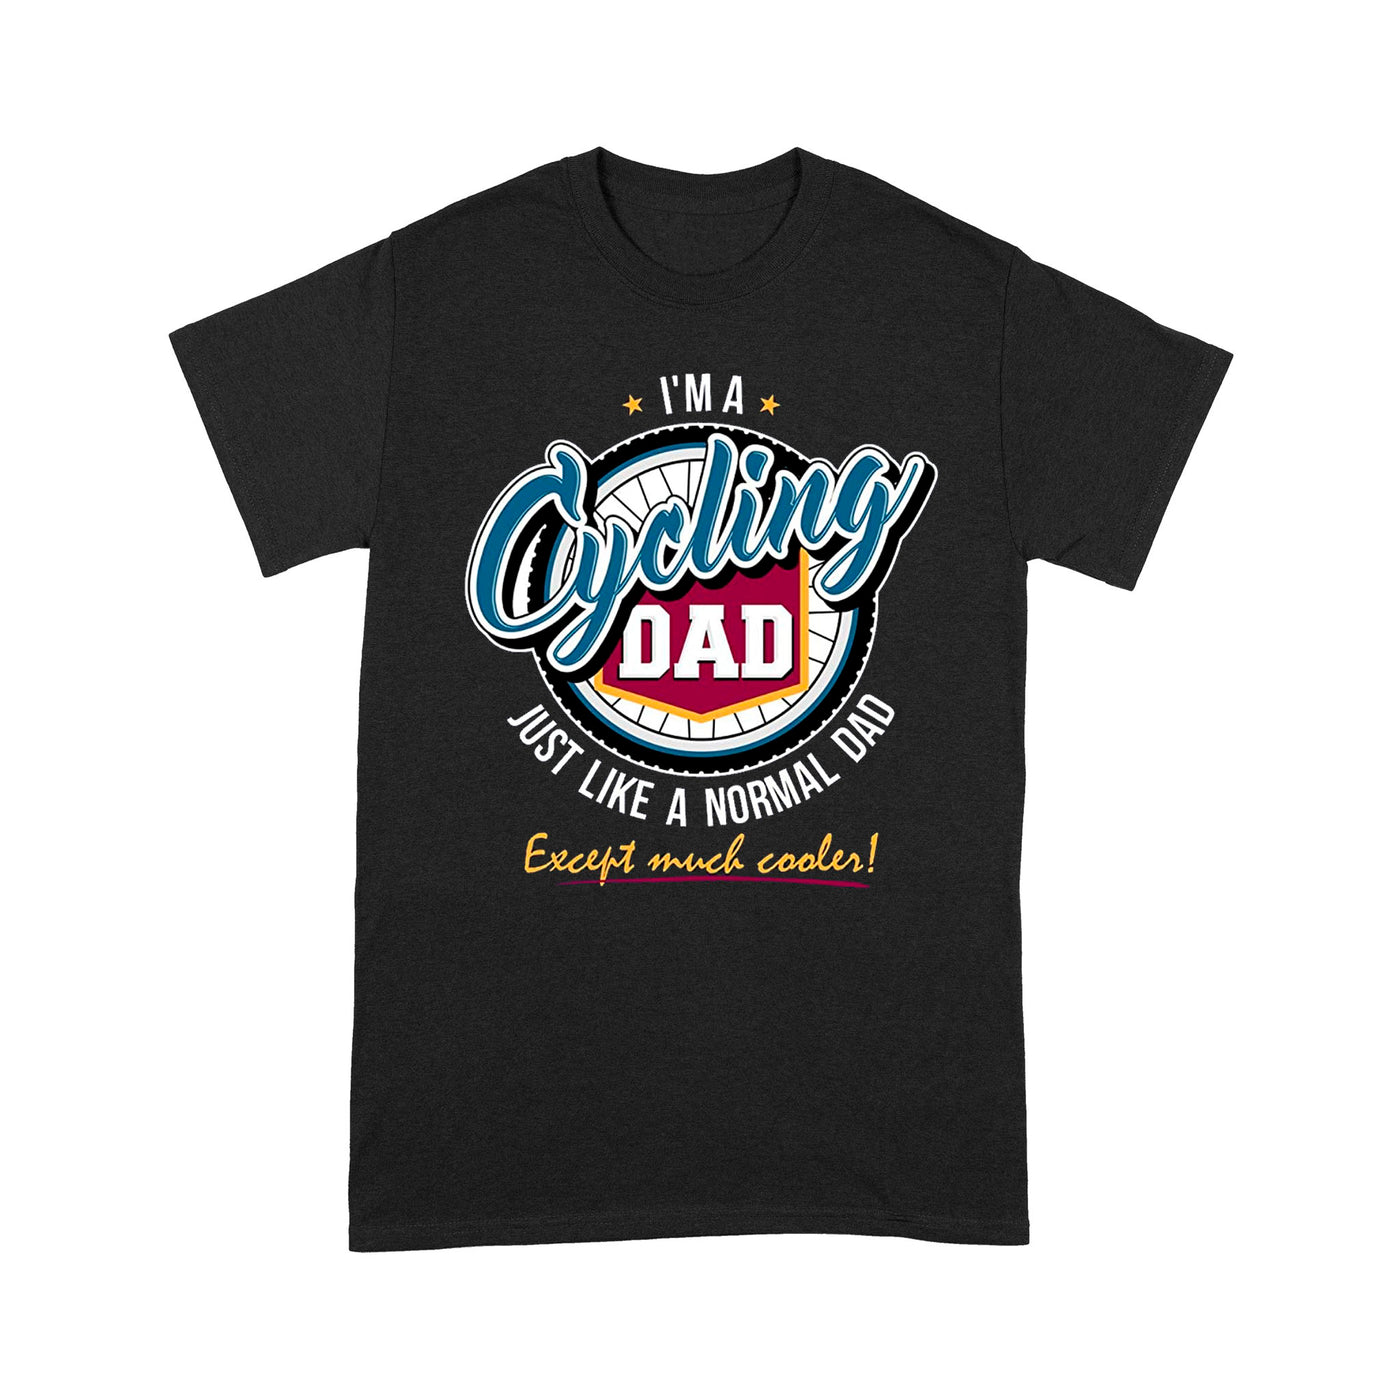 Best Gift For Cycling Dad, Father's Day 2021, "I'm a Cycling Dad just like a normal dad except much cooler" T-shirt